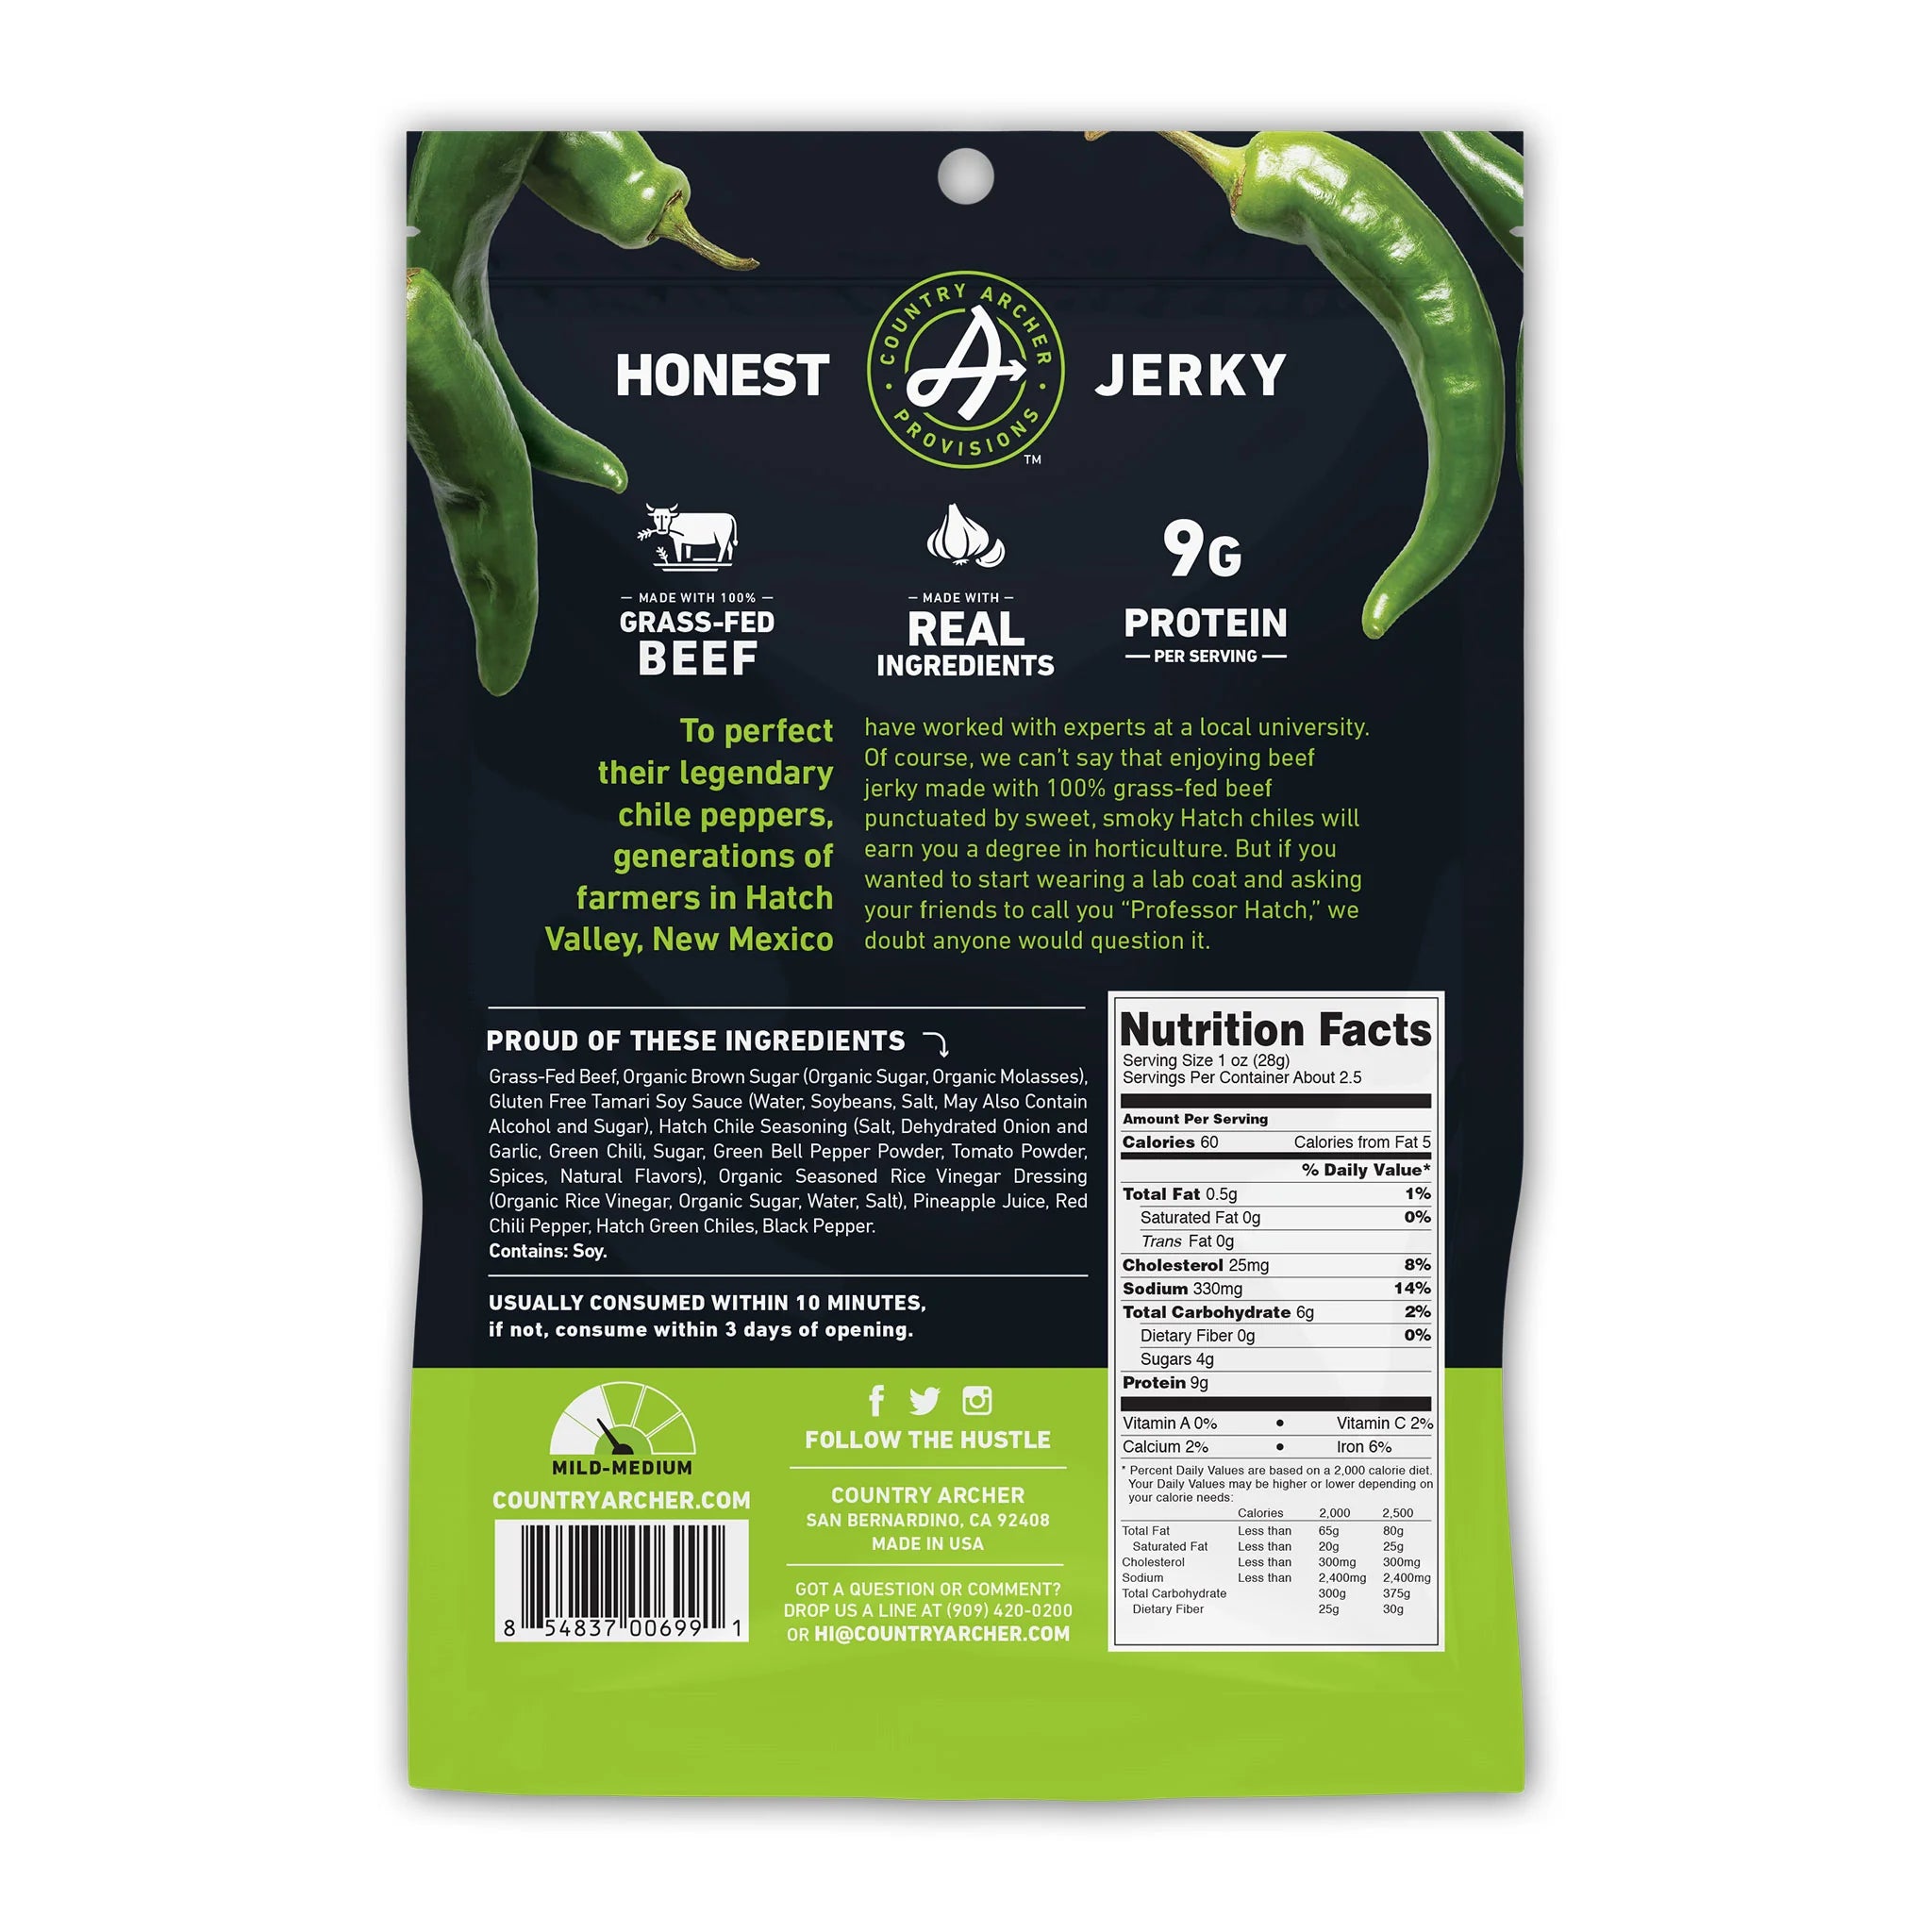 Hatch Chile Beef Jerky